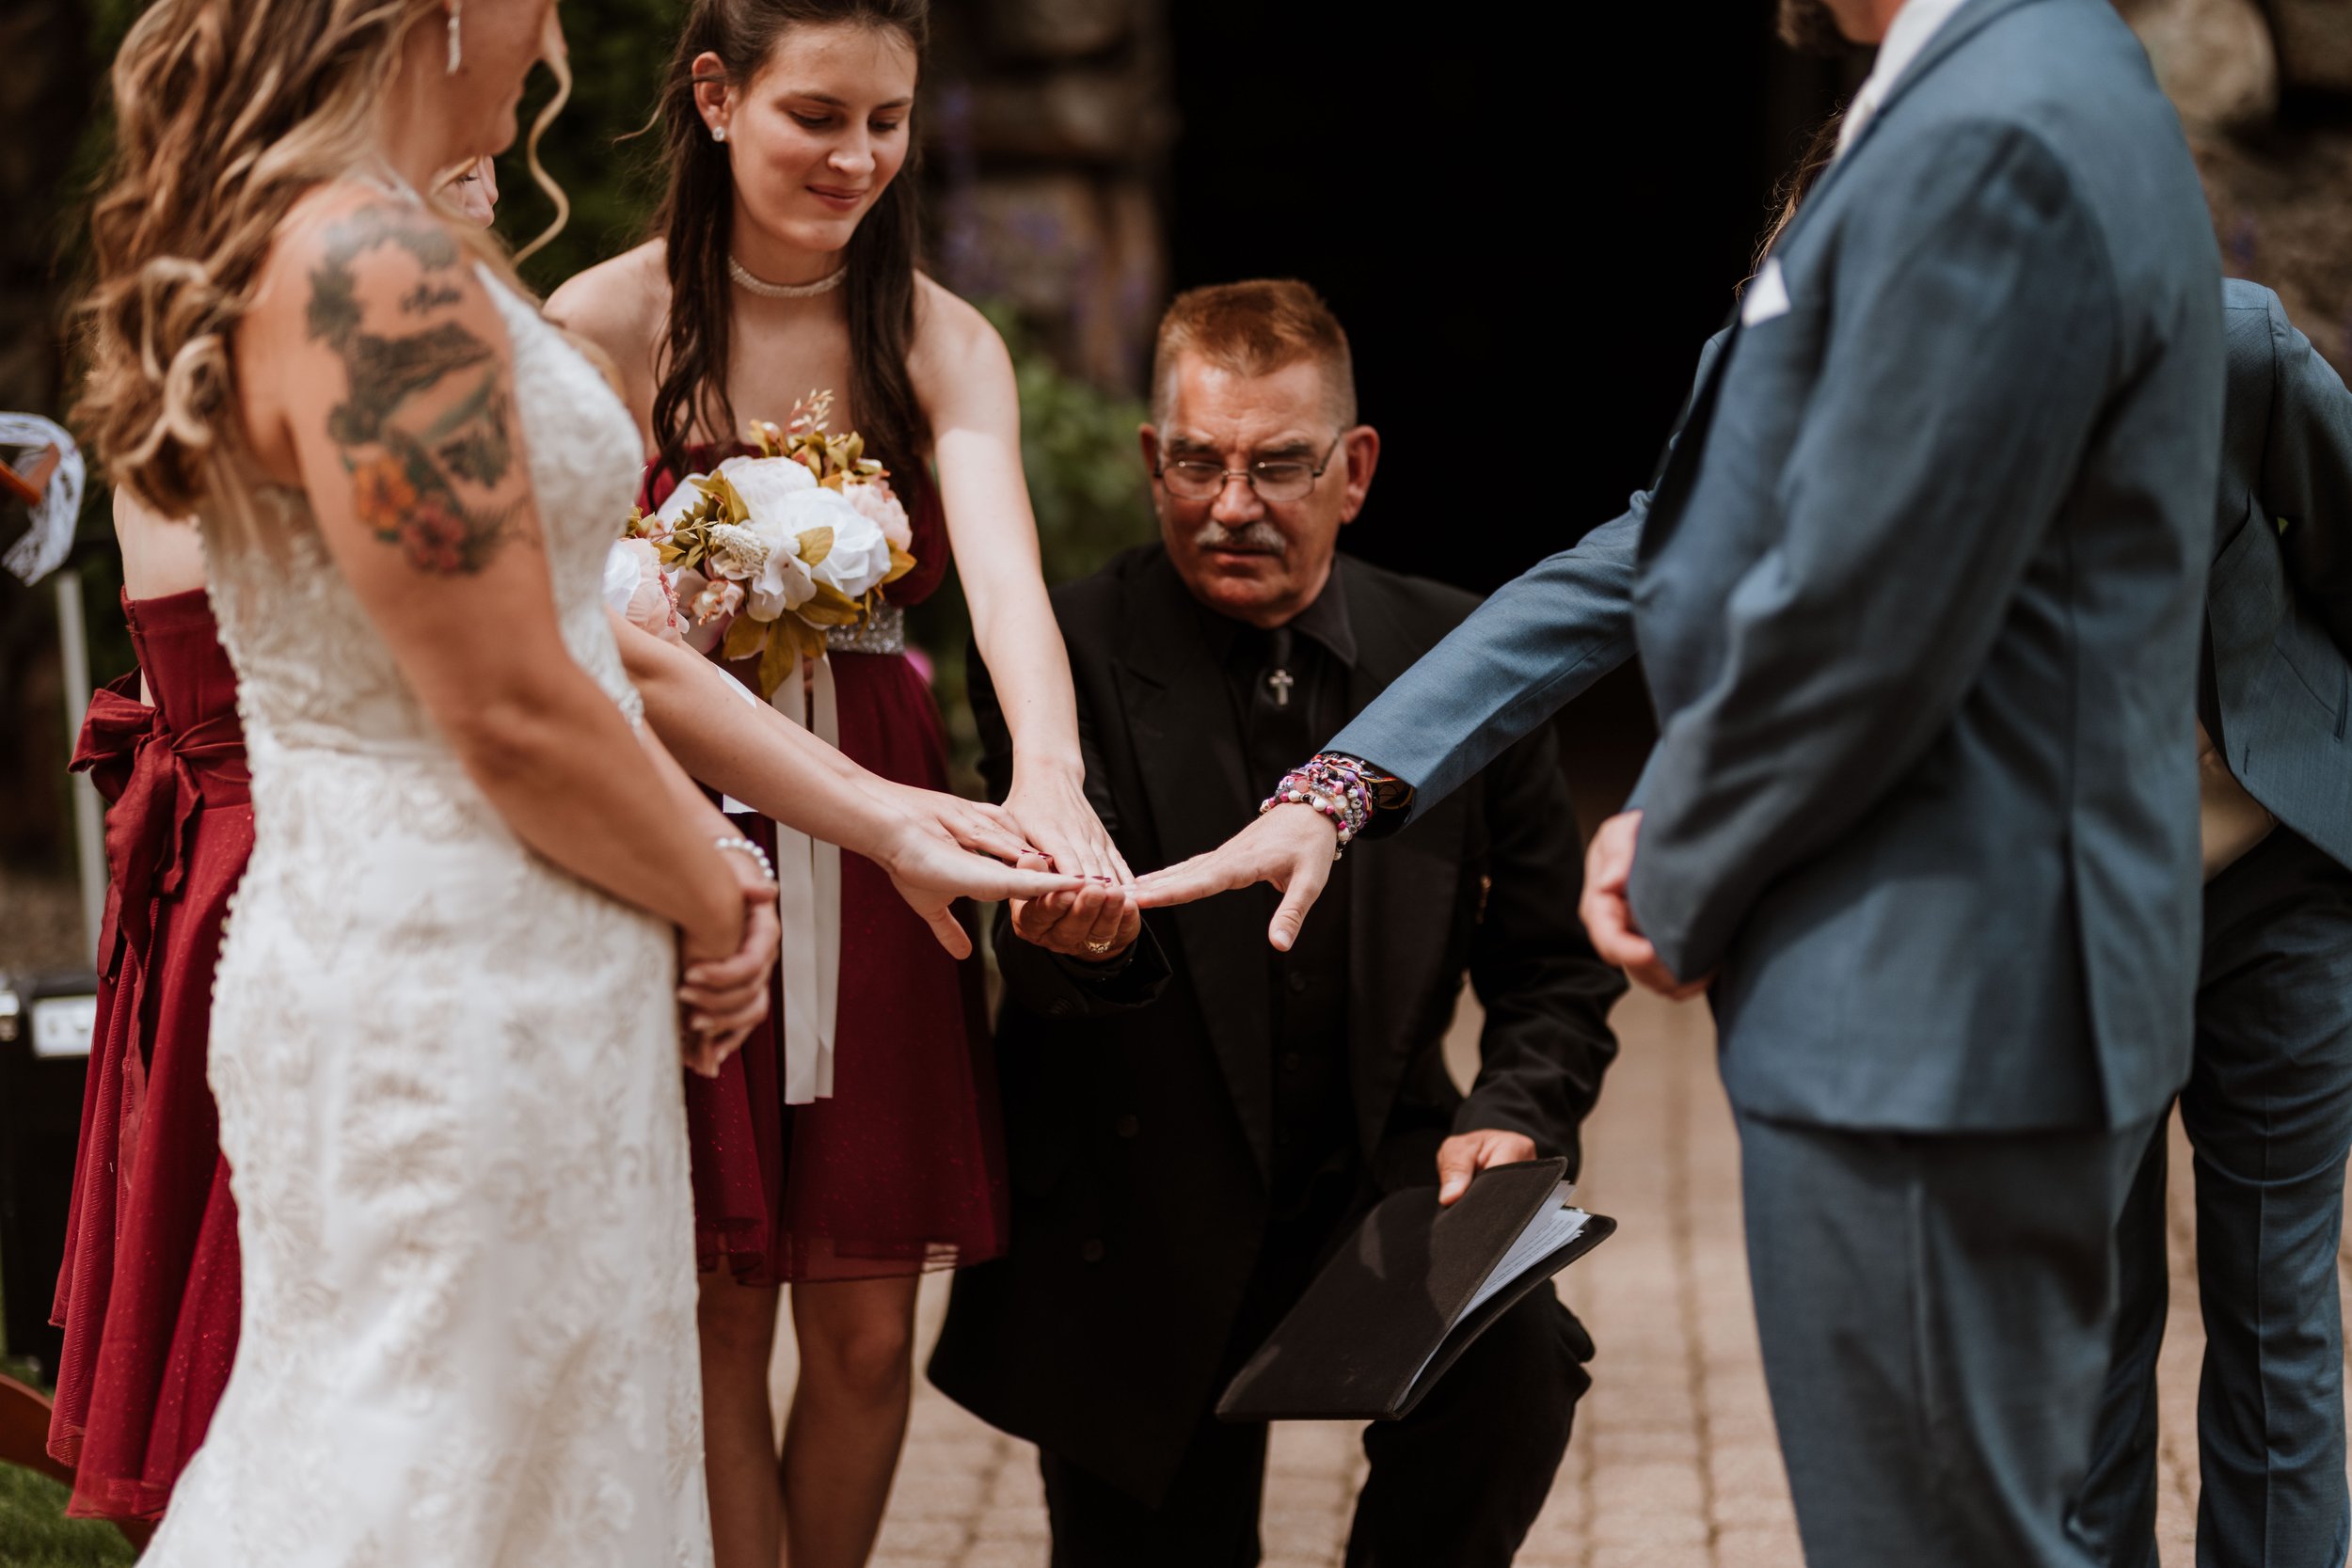 A ring warming at an intimate wedding ceremony where the children of the couple are all touching the newlywed couple's rings.